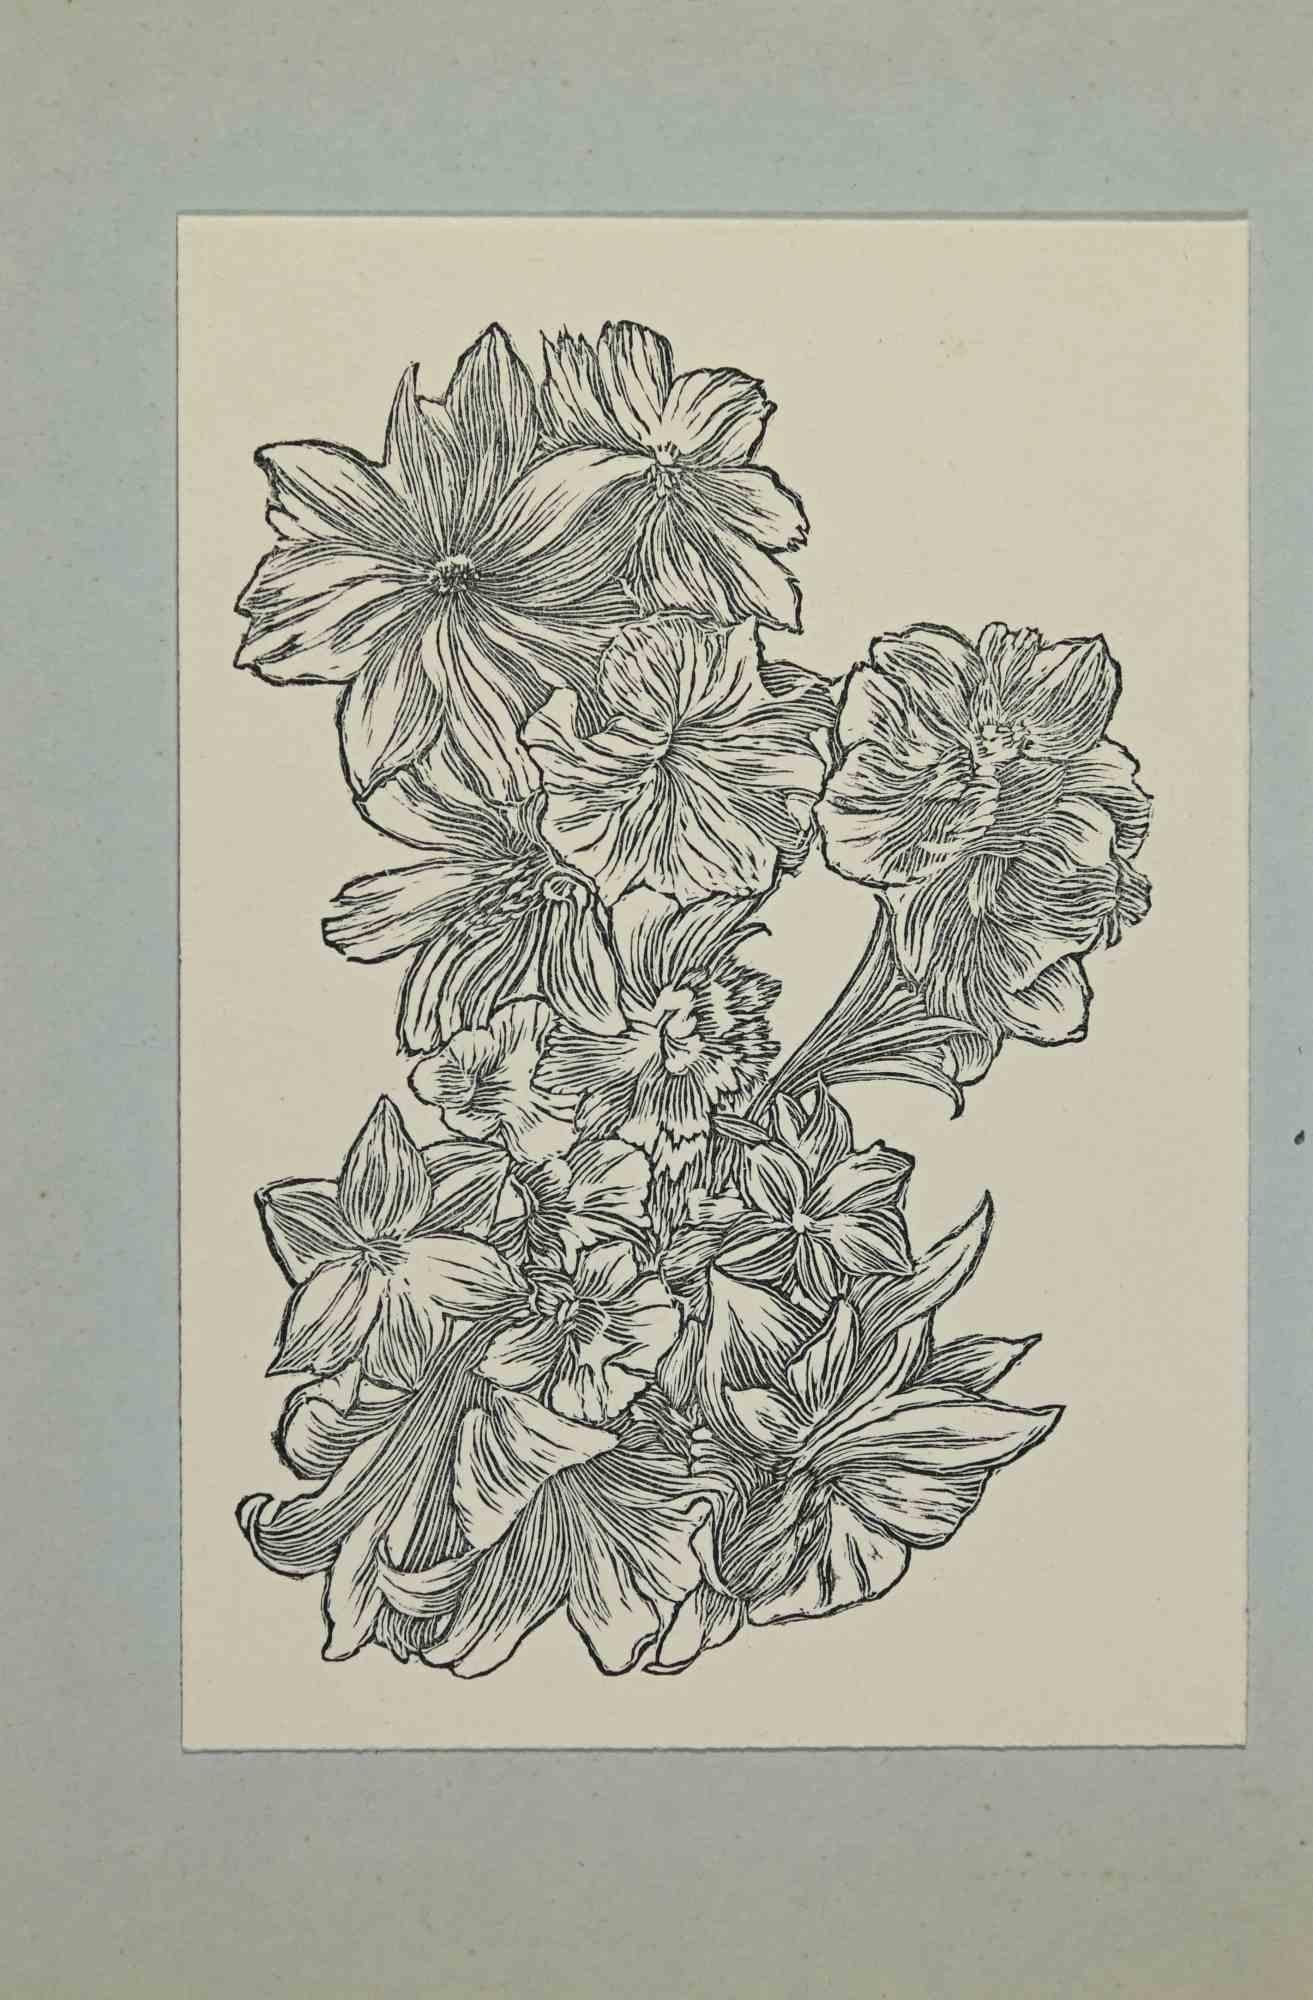 Ex-Libris - Flowers is an Artwork realized in 1947 by the Czech Artist  Frantisek Kobliha (1877-1962).

Woodcut B./W. print on ivory paper. Signed on plate and dated on back. The work is glued on colored cardboard.

Total dimensions: 20 x 13.5